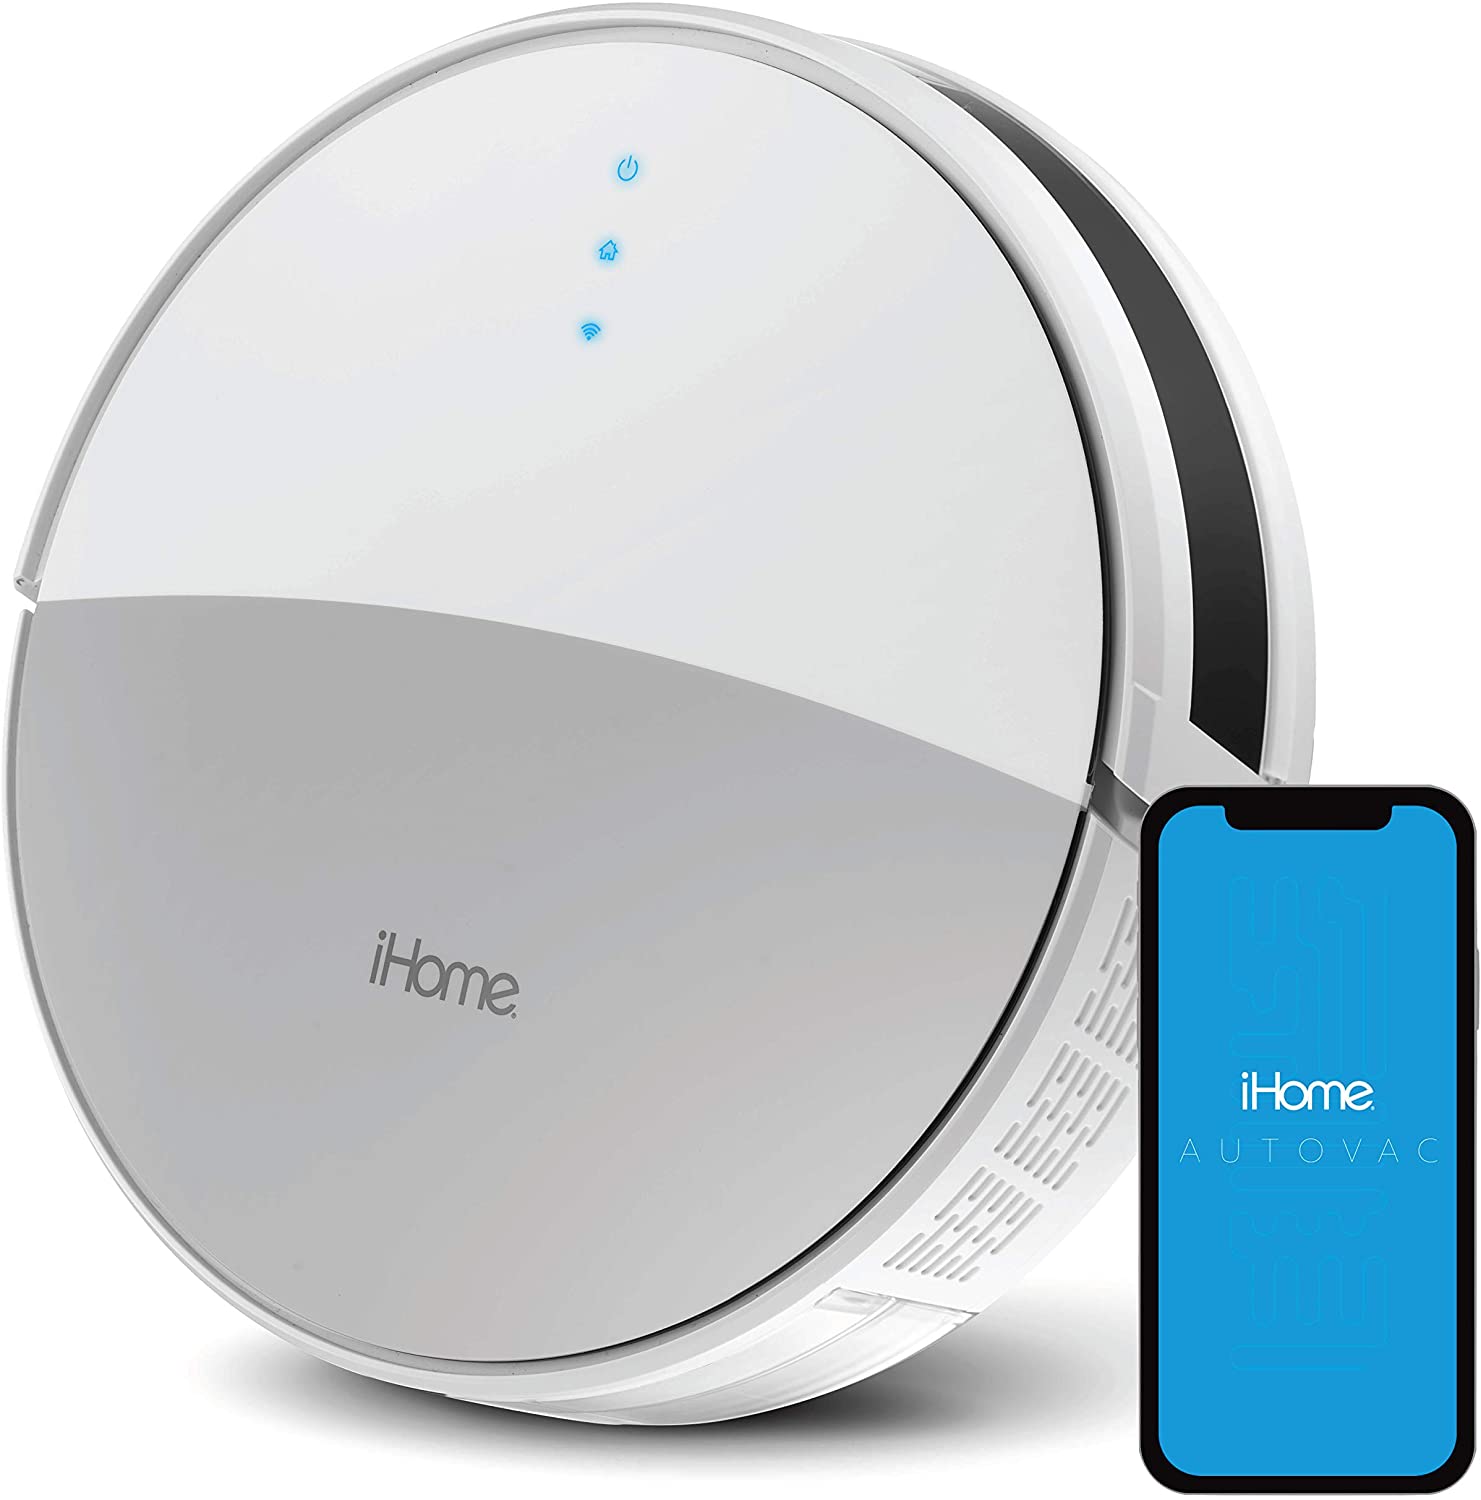 Read more about the article iHome AutoVac Eclipse Review